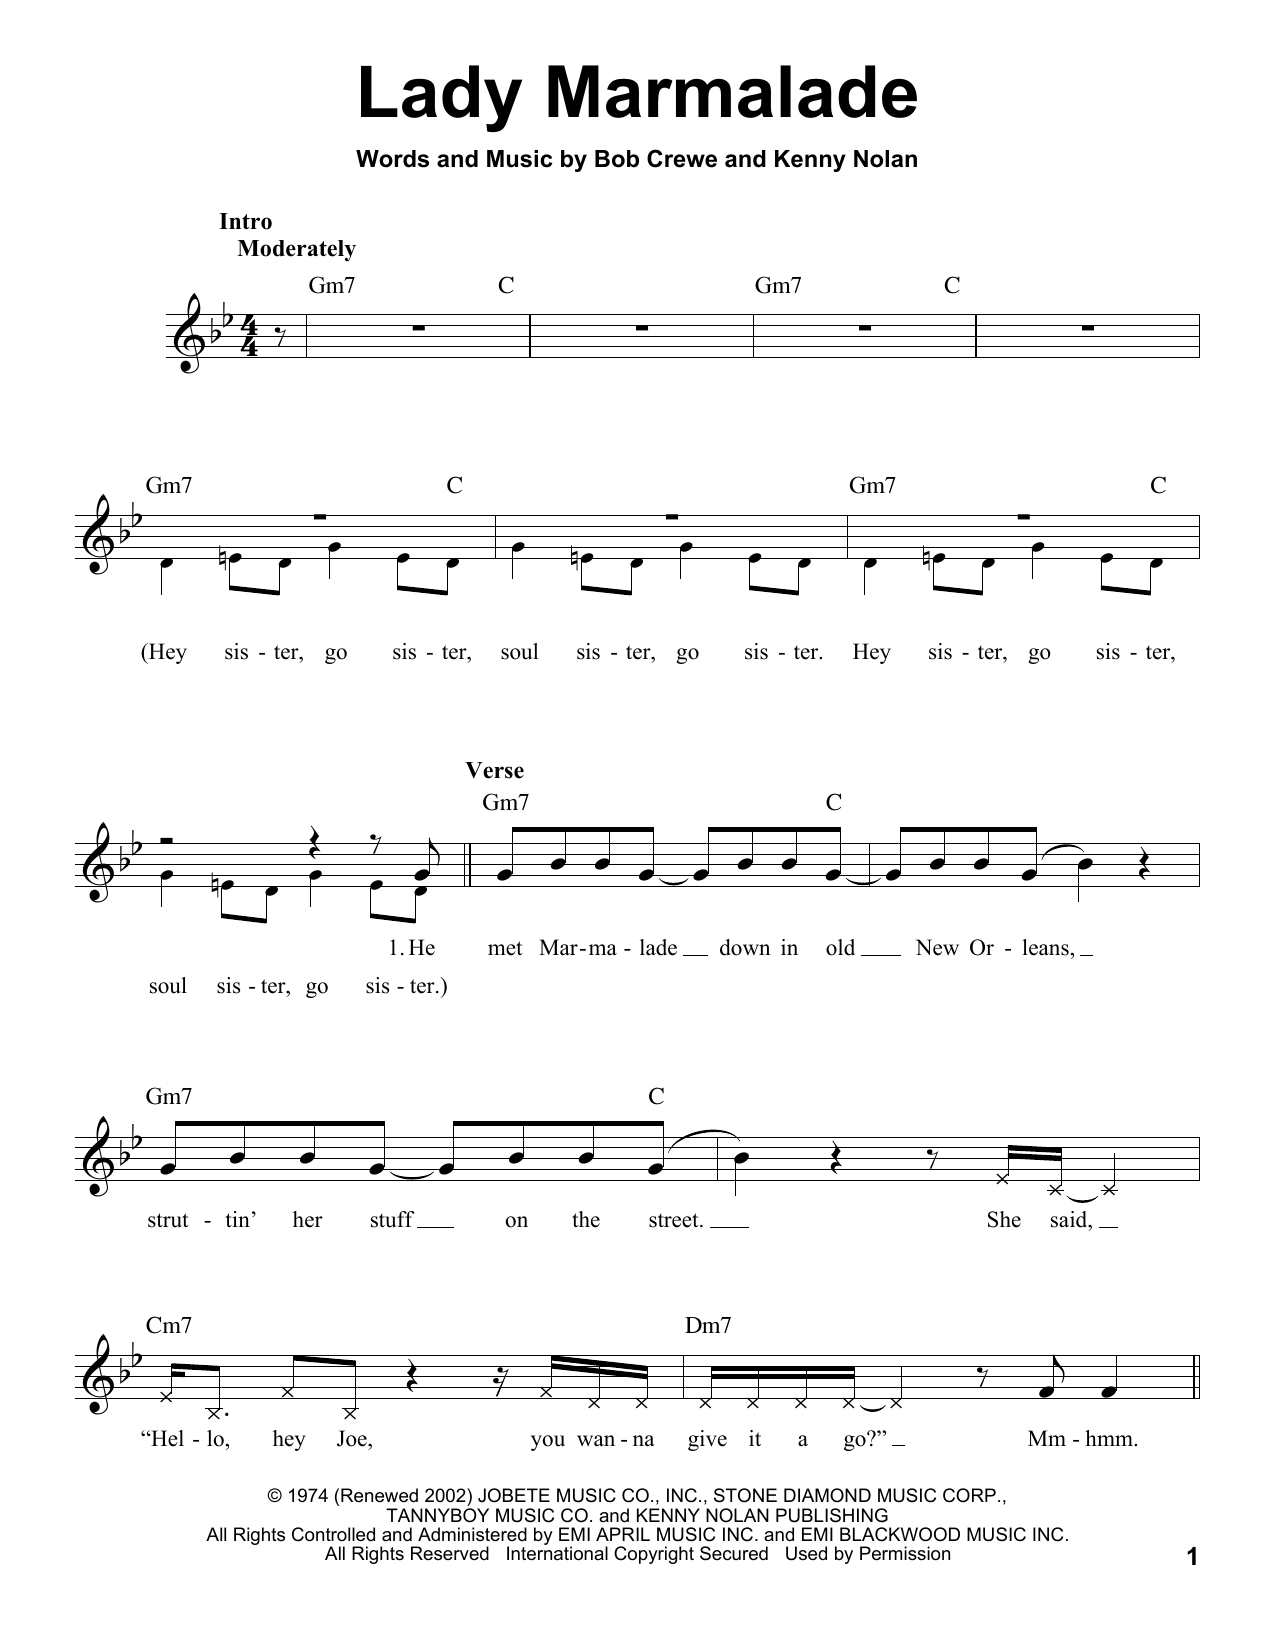 Download Patty LaBelle Lady Marmalade Sheet Music